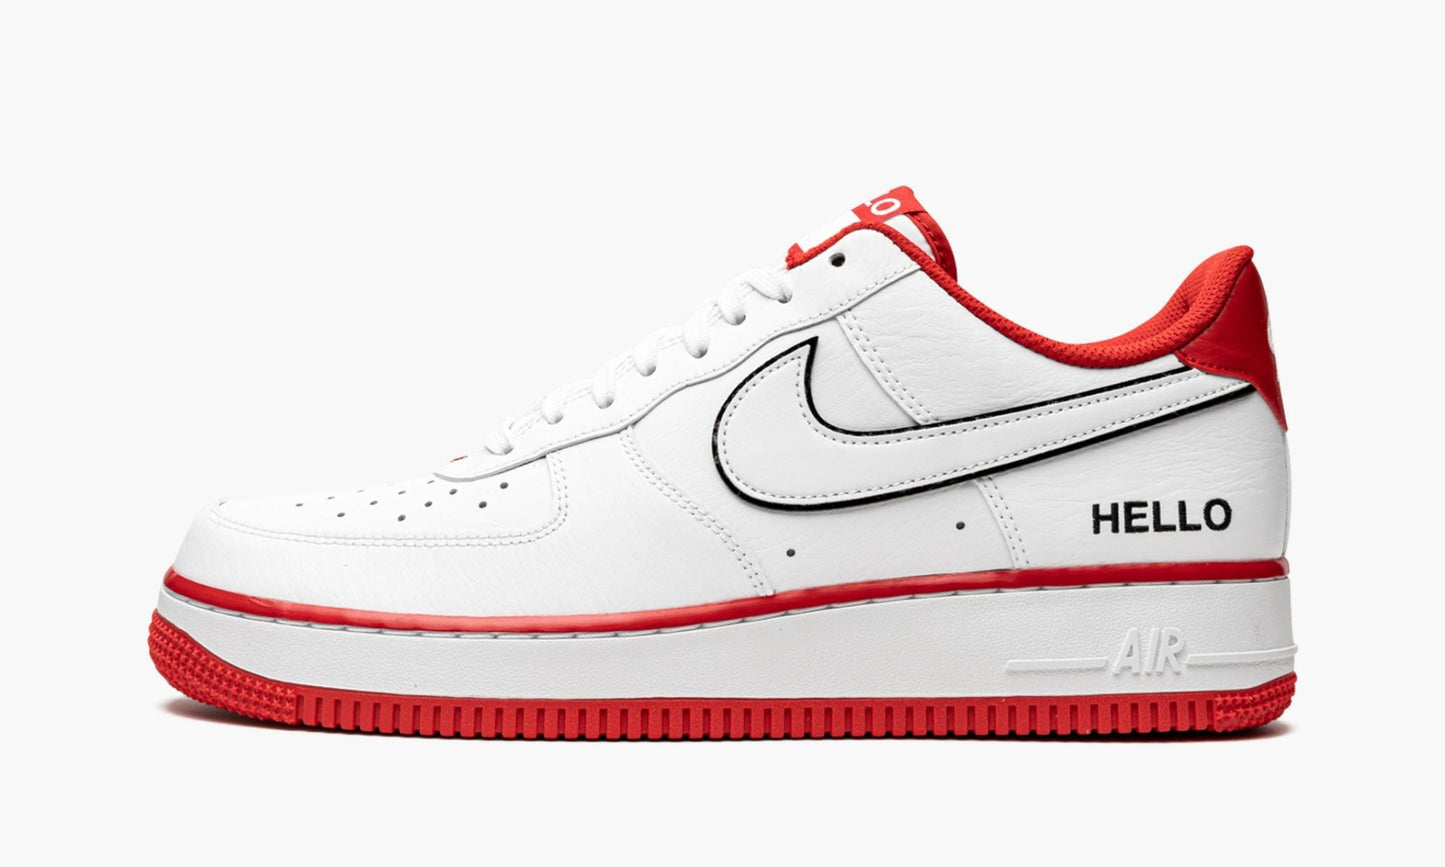 Air Force 1 Low '07 LX "Hello"